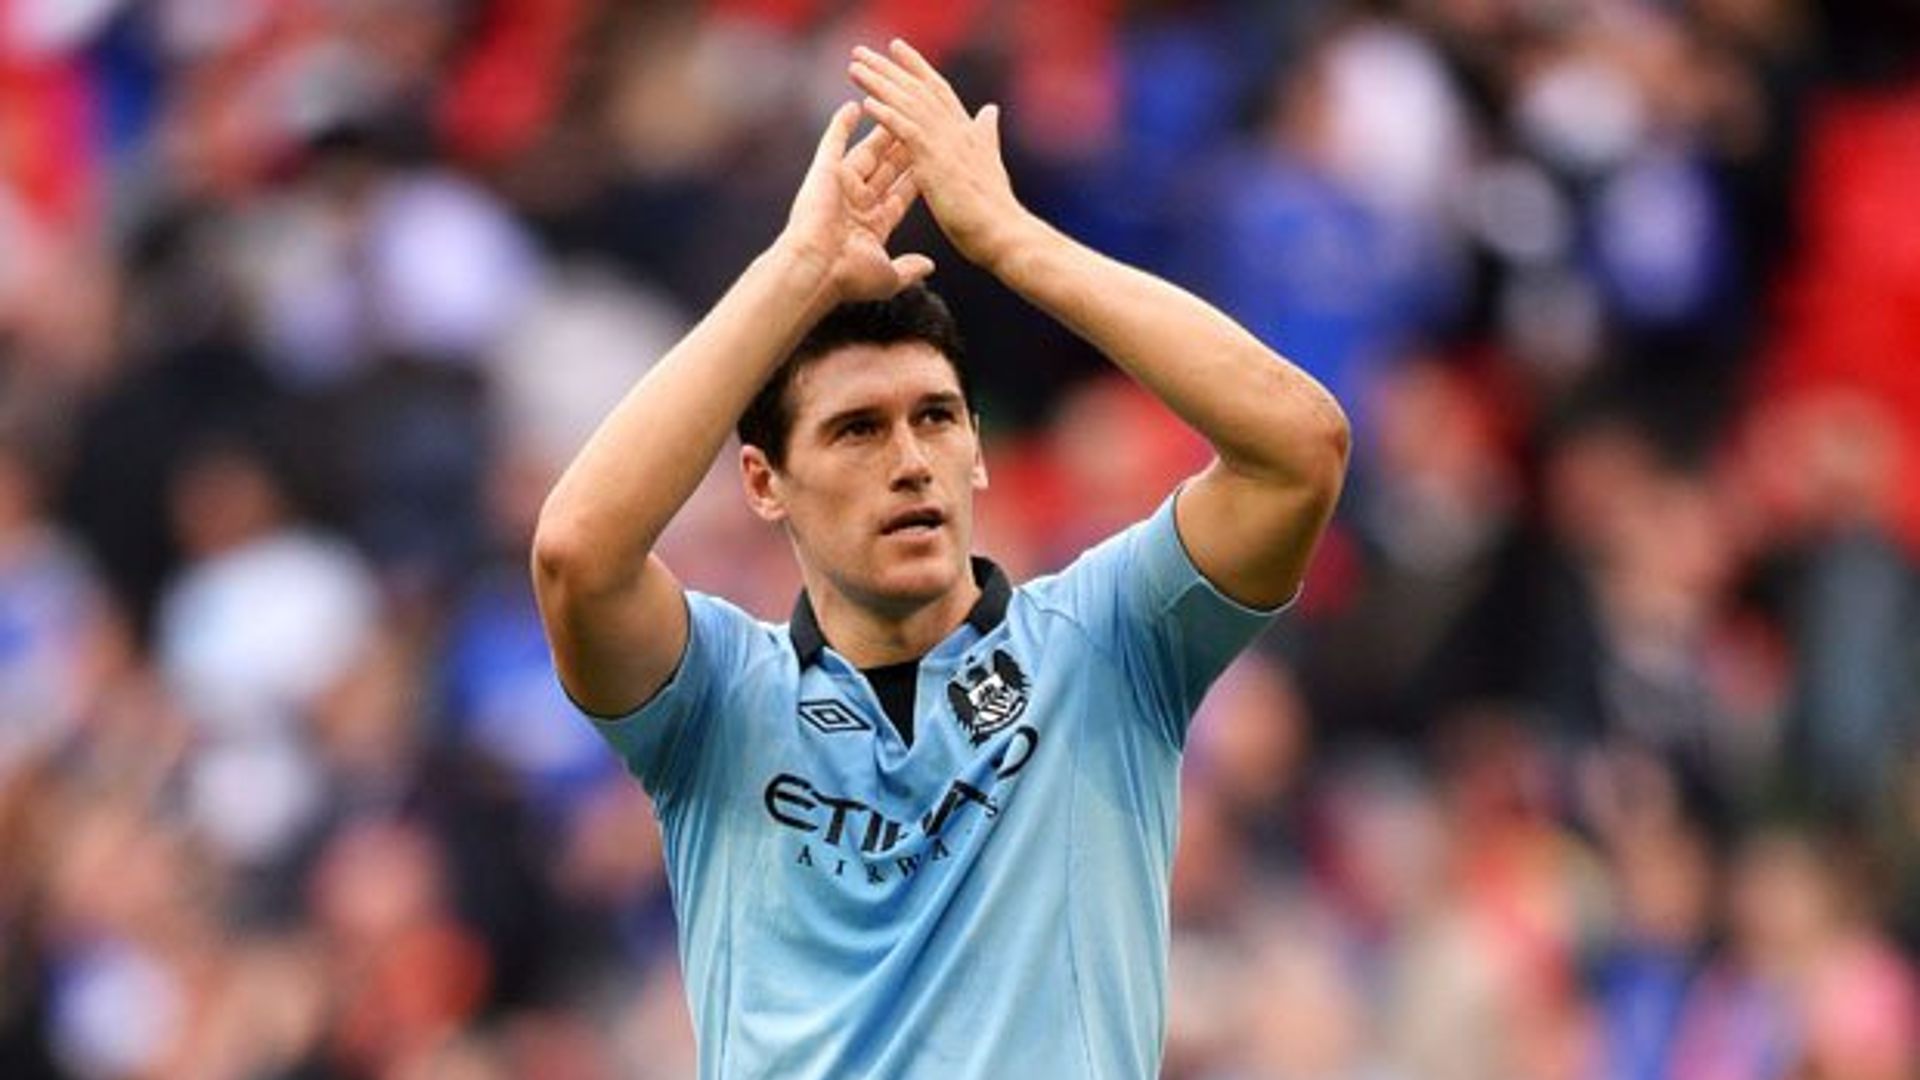 Gareth Barry for Manchester City, Credit: Twitter/@ManCity